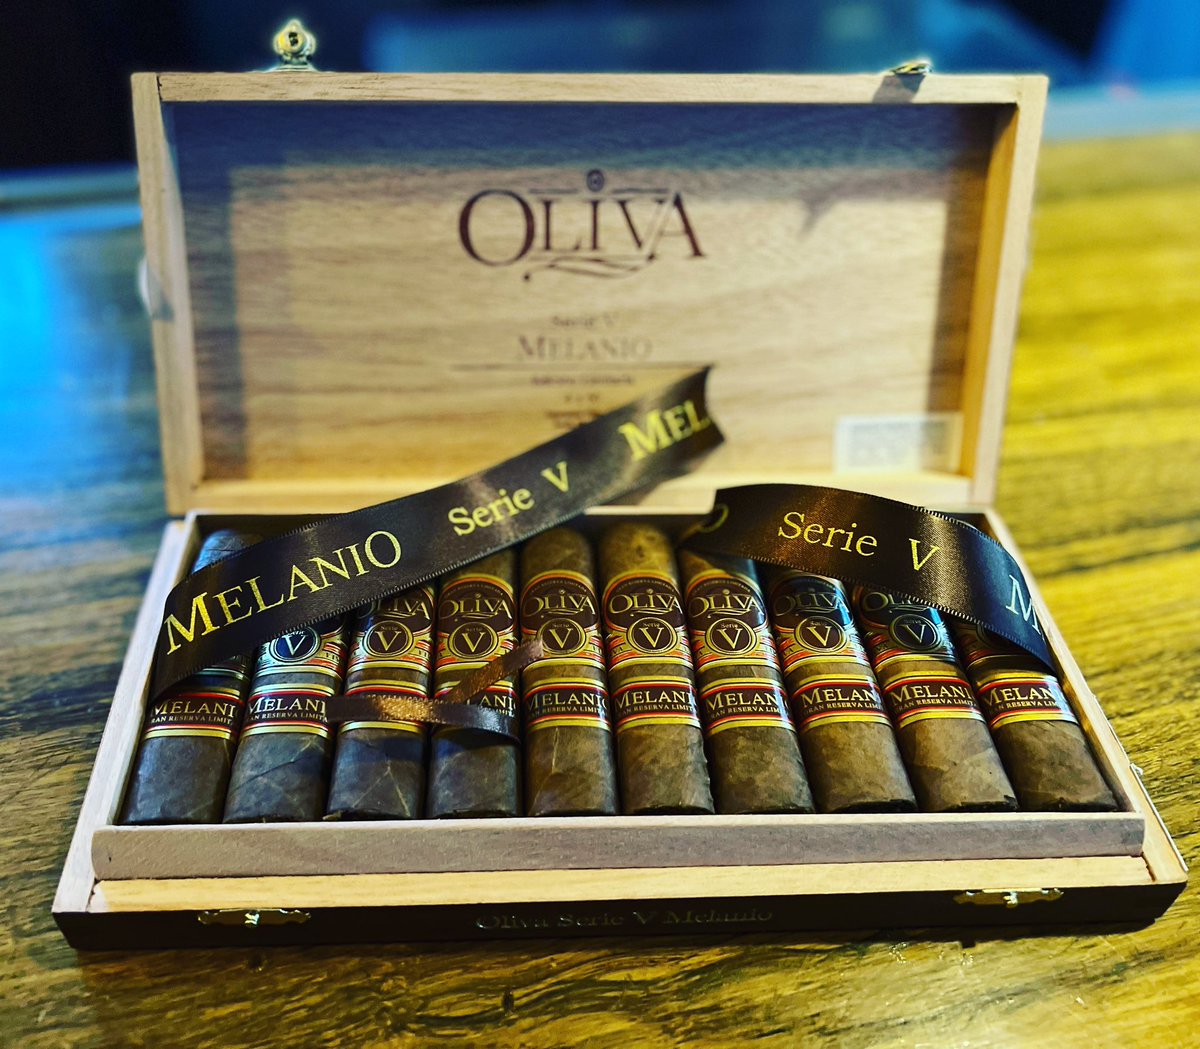 IN STOCK NOW! The @OlivaCigar Serie V Melanio Nub cigars are a limited production addition to the ever popular Oliva Serie V brand. This box-Pressed nub cigar was created to celebrate the Oliva family patriarch Melanio Oliva, who grew tobacco in the Pinar Del Rio region of Cuba.